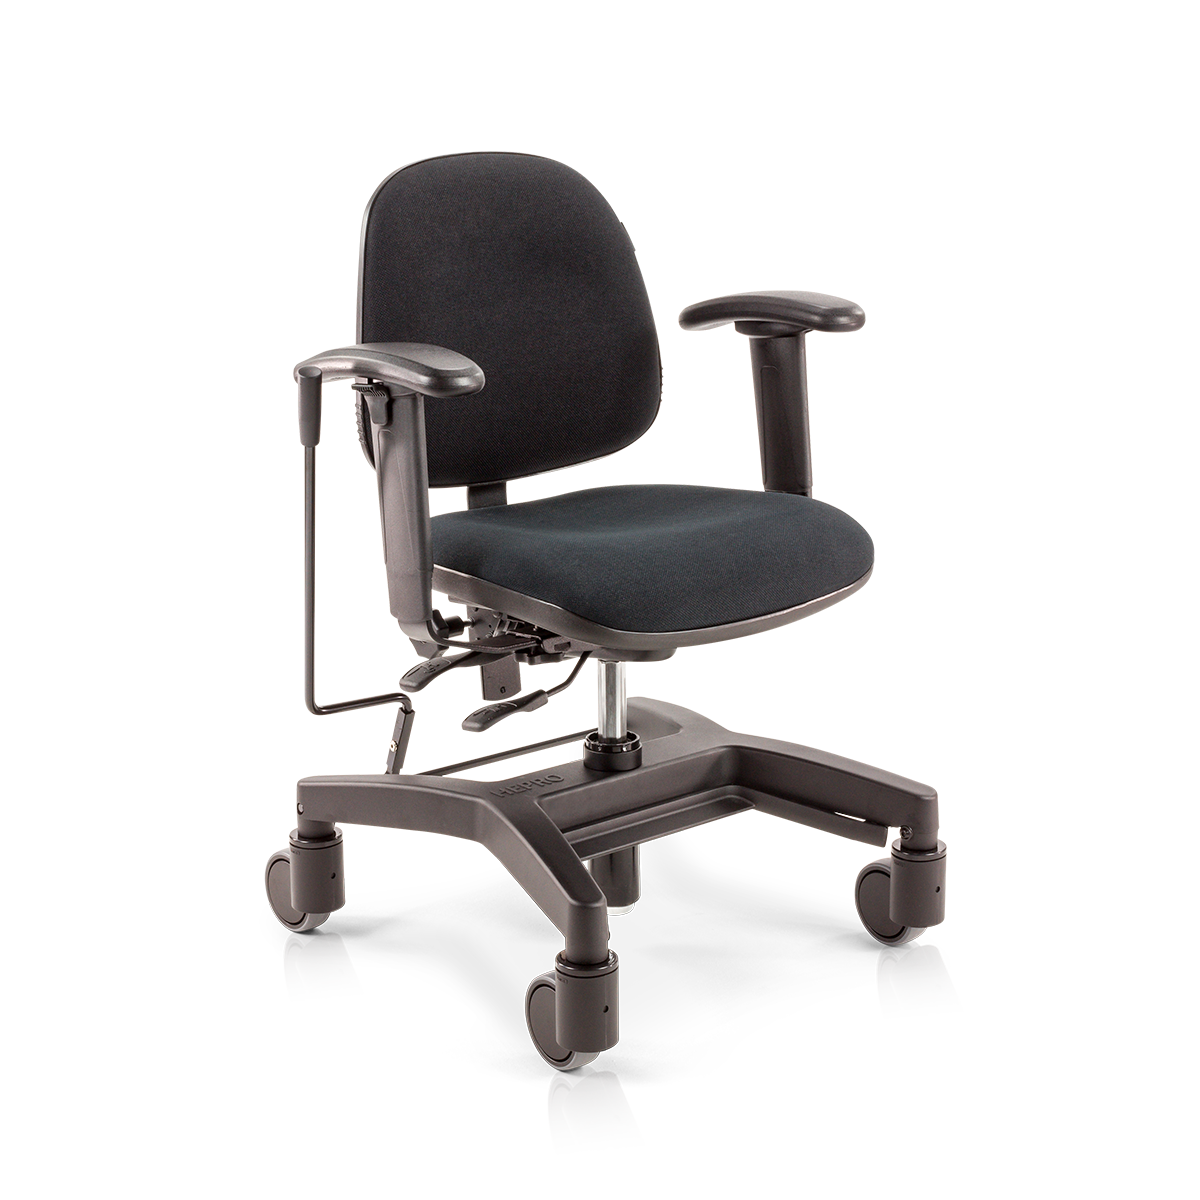 Score Mobility work chair 2300